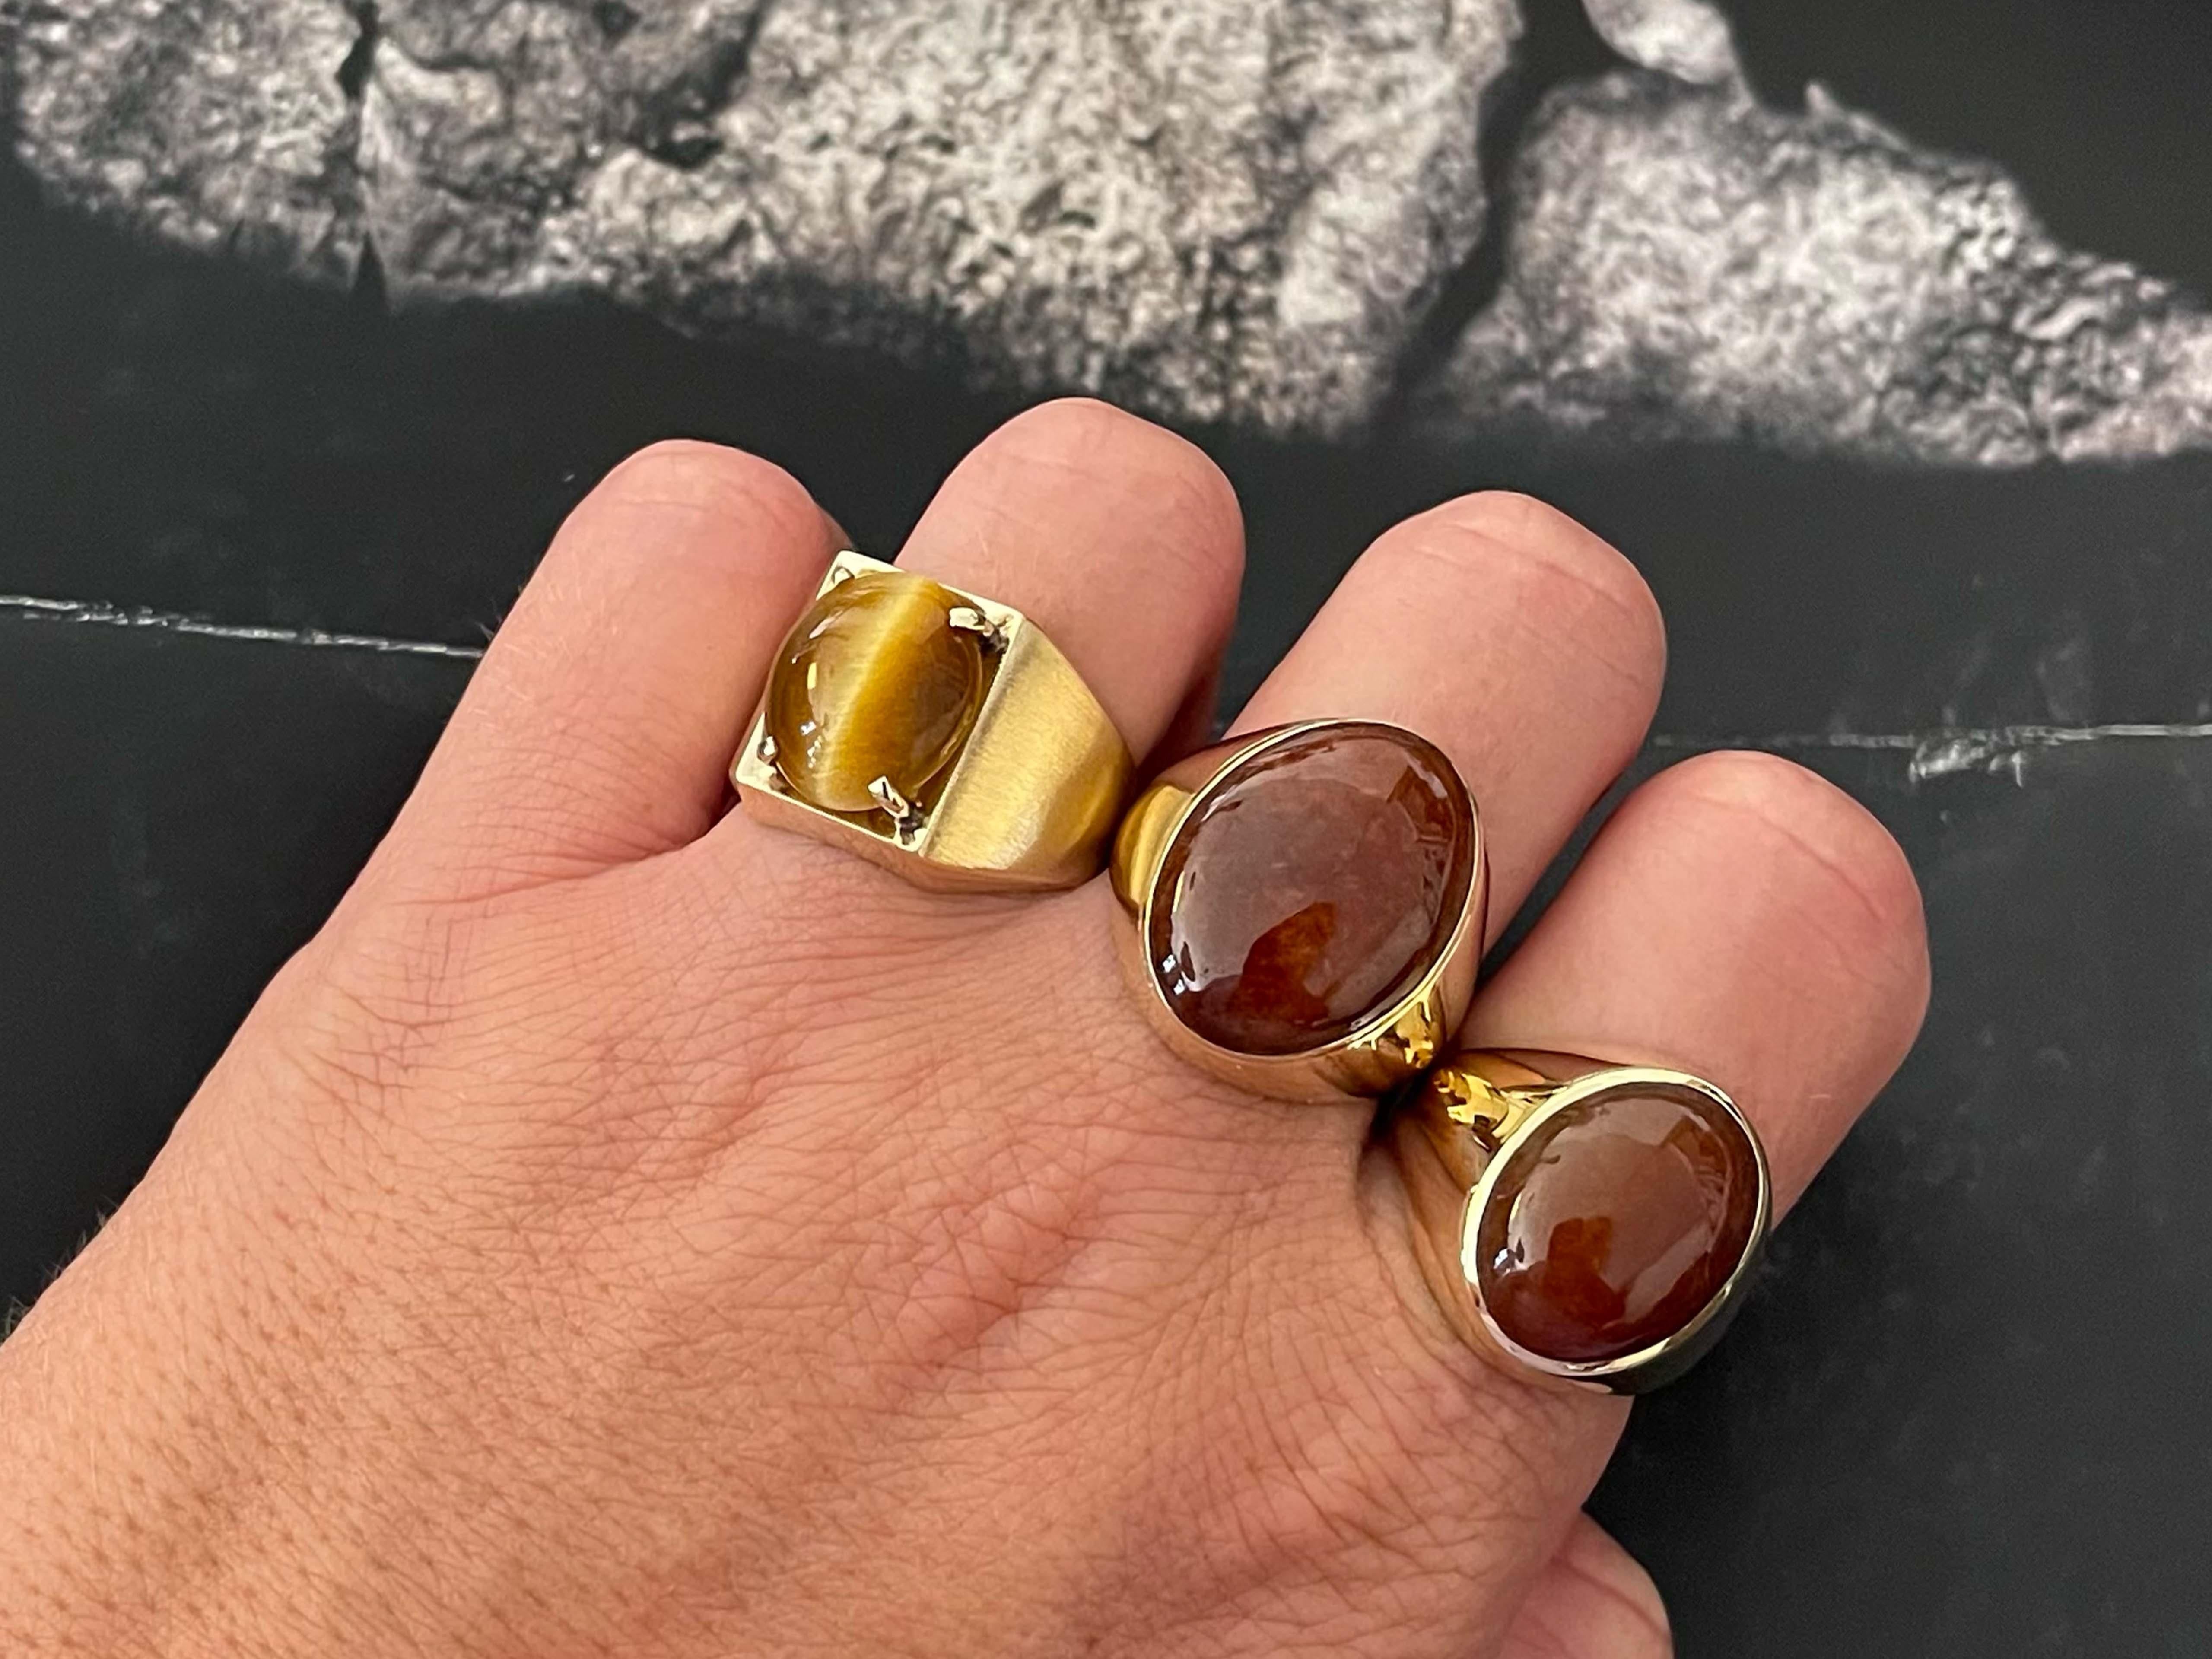 Ring Specifications:

Metal: 18k Yellow Gold

Total Weight: 11.5 Grams

Tiger's Eye Carat Weight: ~5.5 carats

Tiger's Eye Measurements: 13.9 mm x 11.8 mm x 4.6 mm

Ring Size: 9.5 (resizable)

Stamped: 